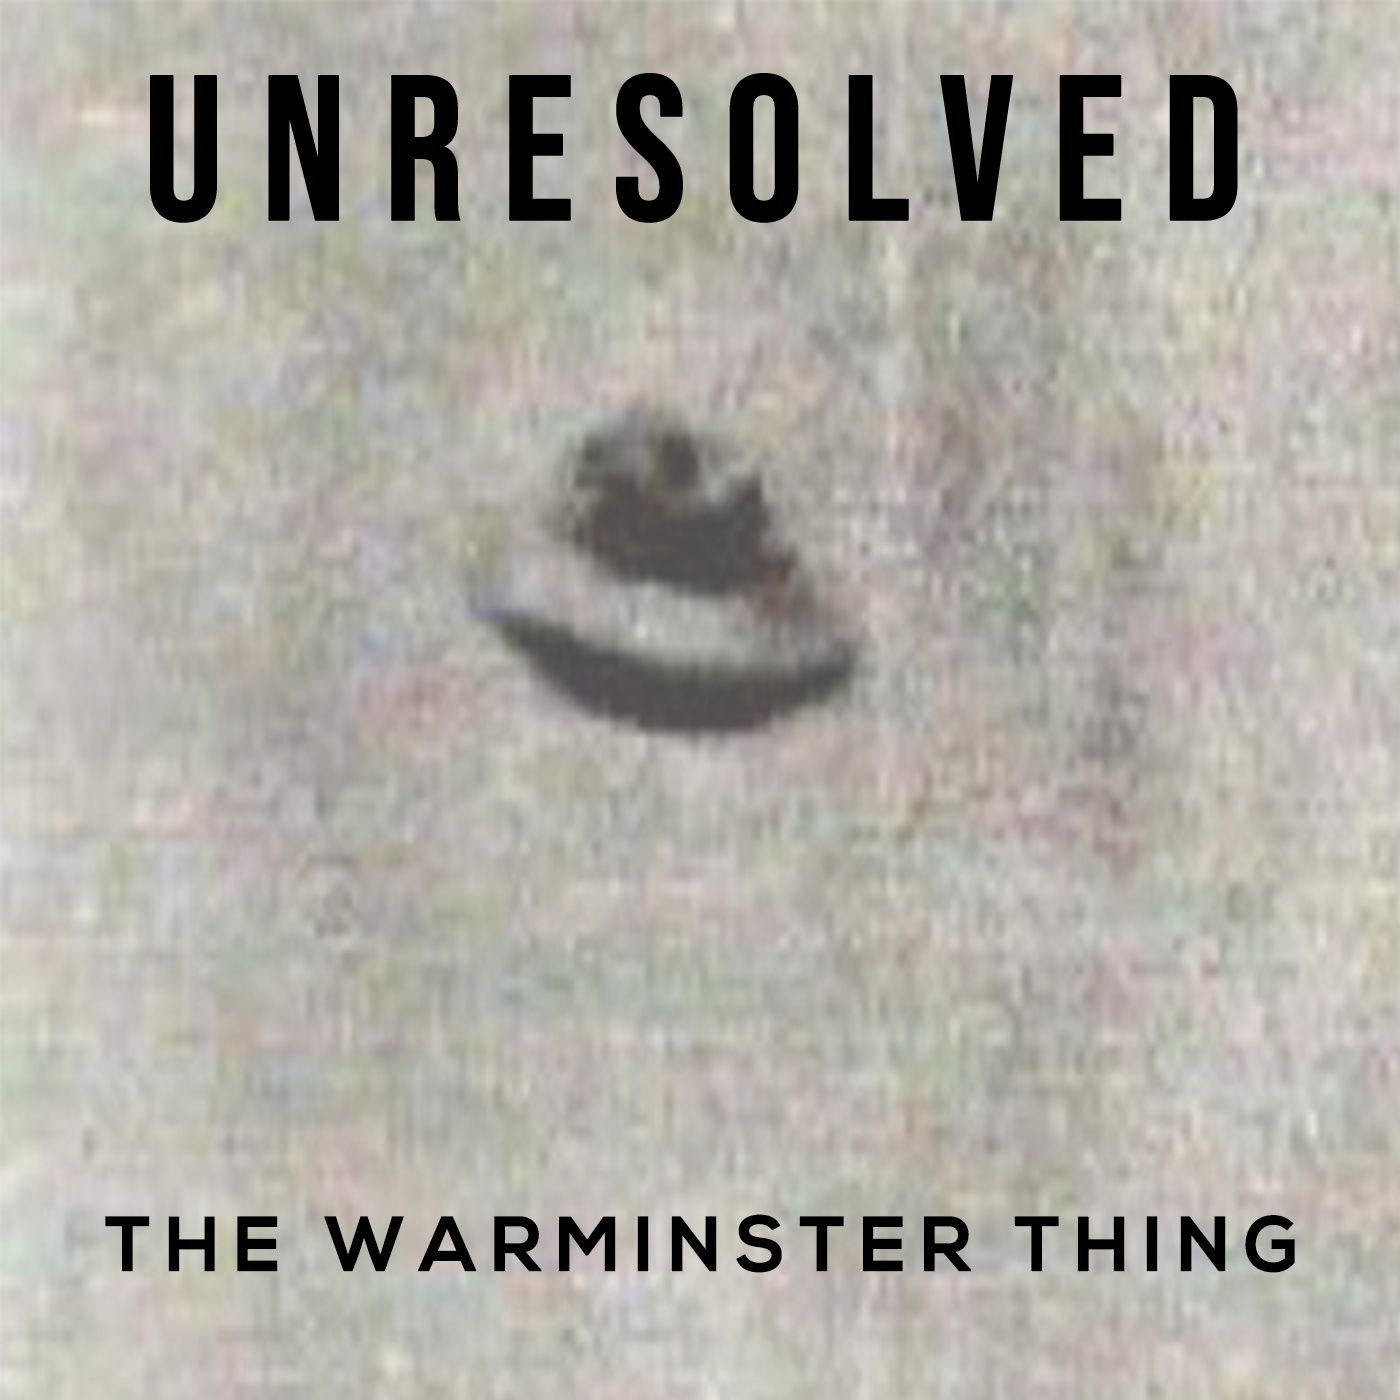 The Warminster "Thing"